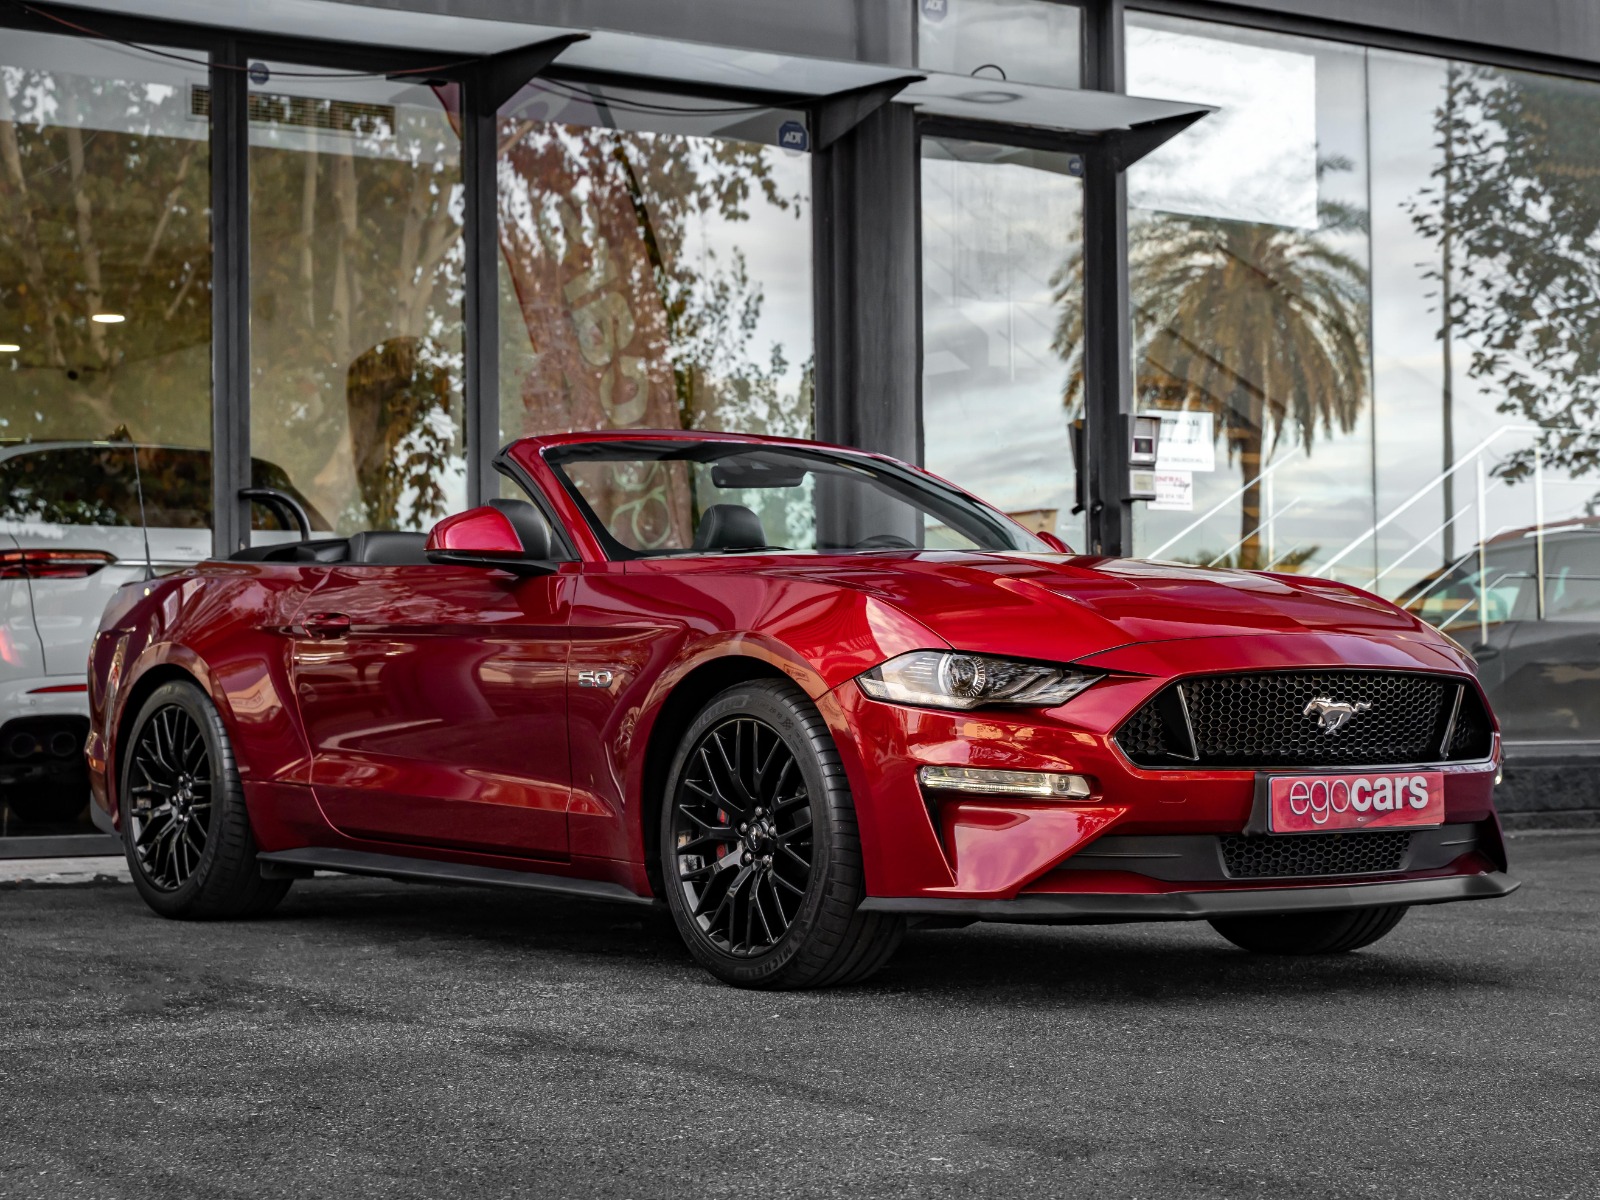 FORD MUSTANG GT CONVERTIBLE - EGOCARS (2)